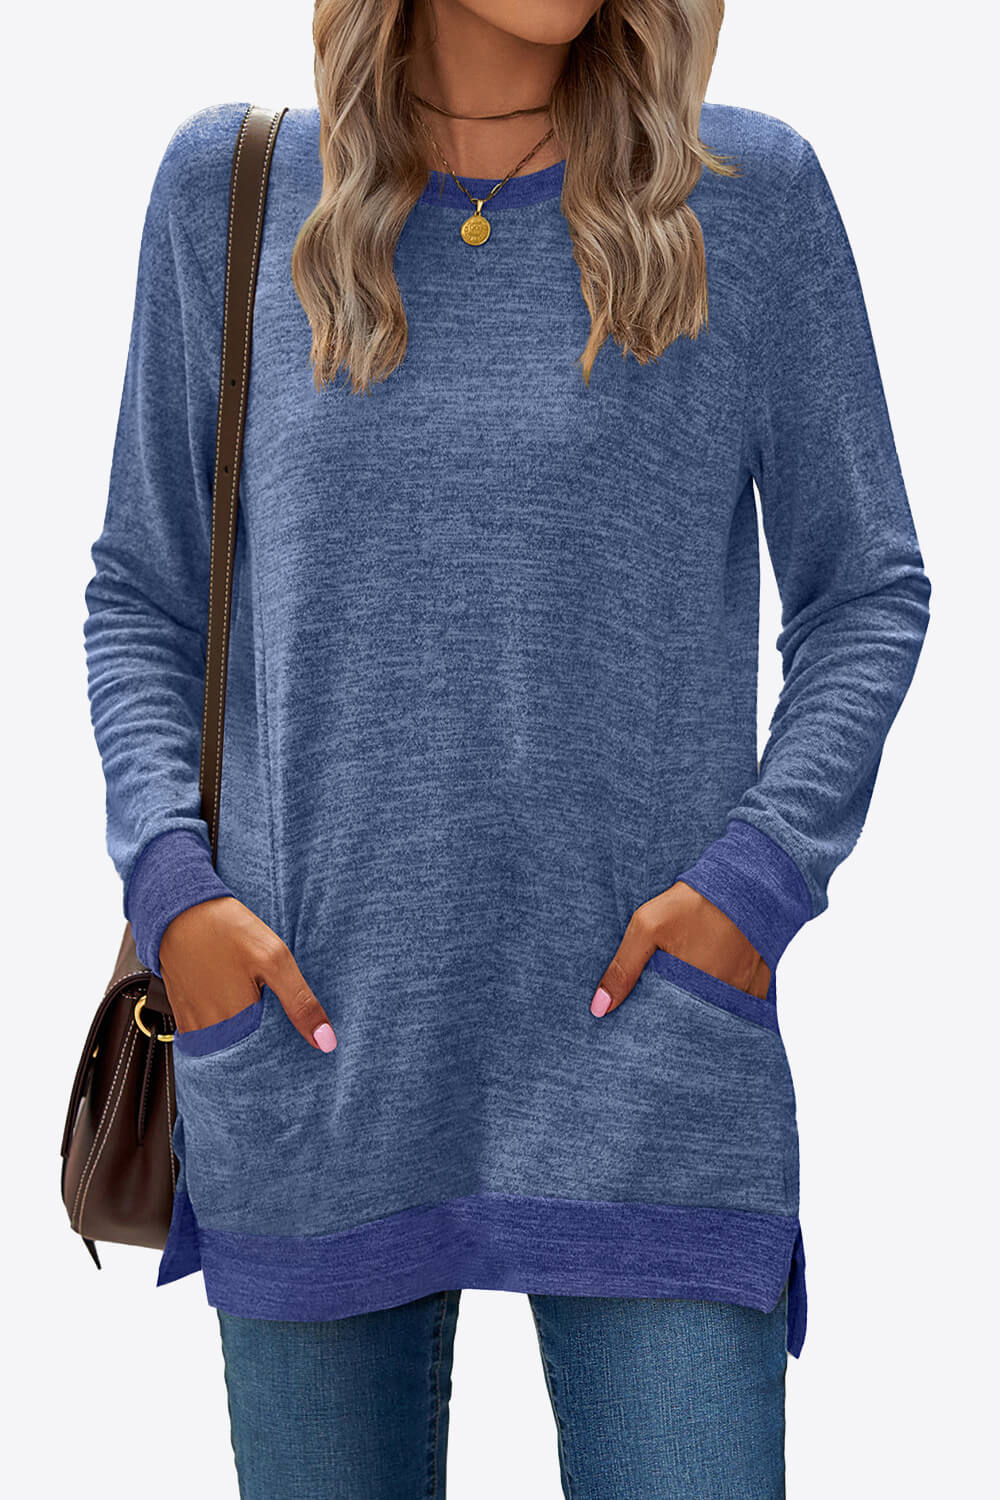 Heathered Slit Top with Pockets - Blue / S - T-Shirts - Shirts & Tops - 22 - 2024